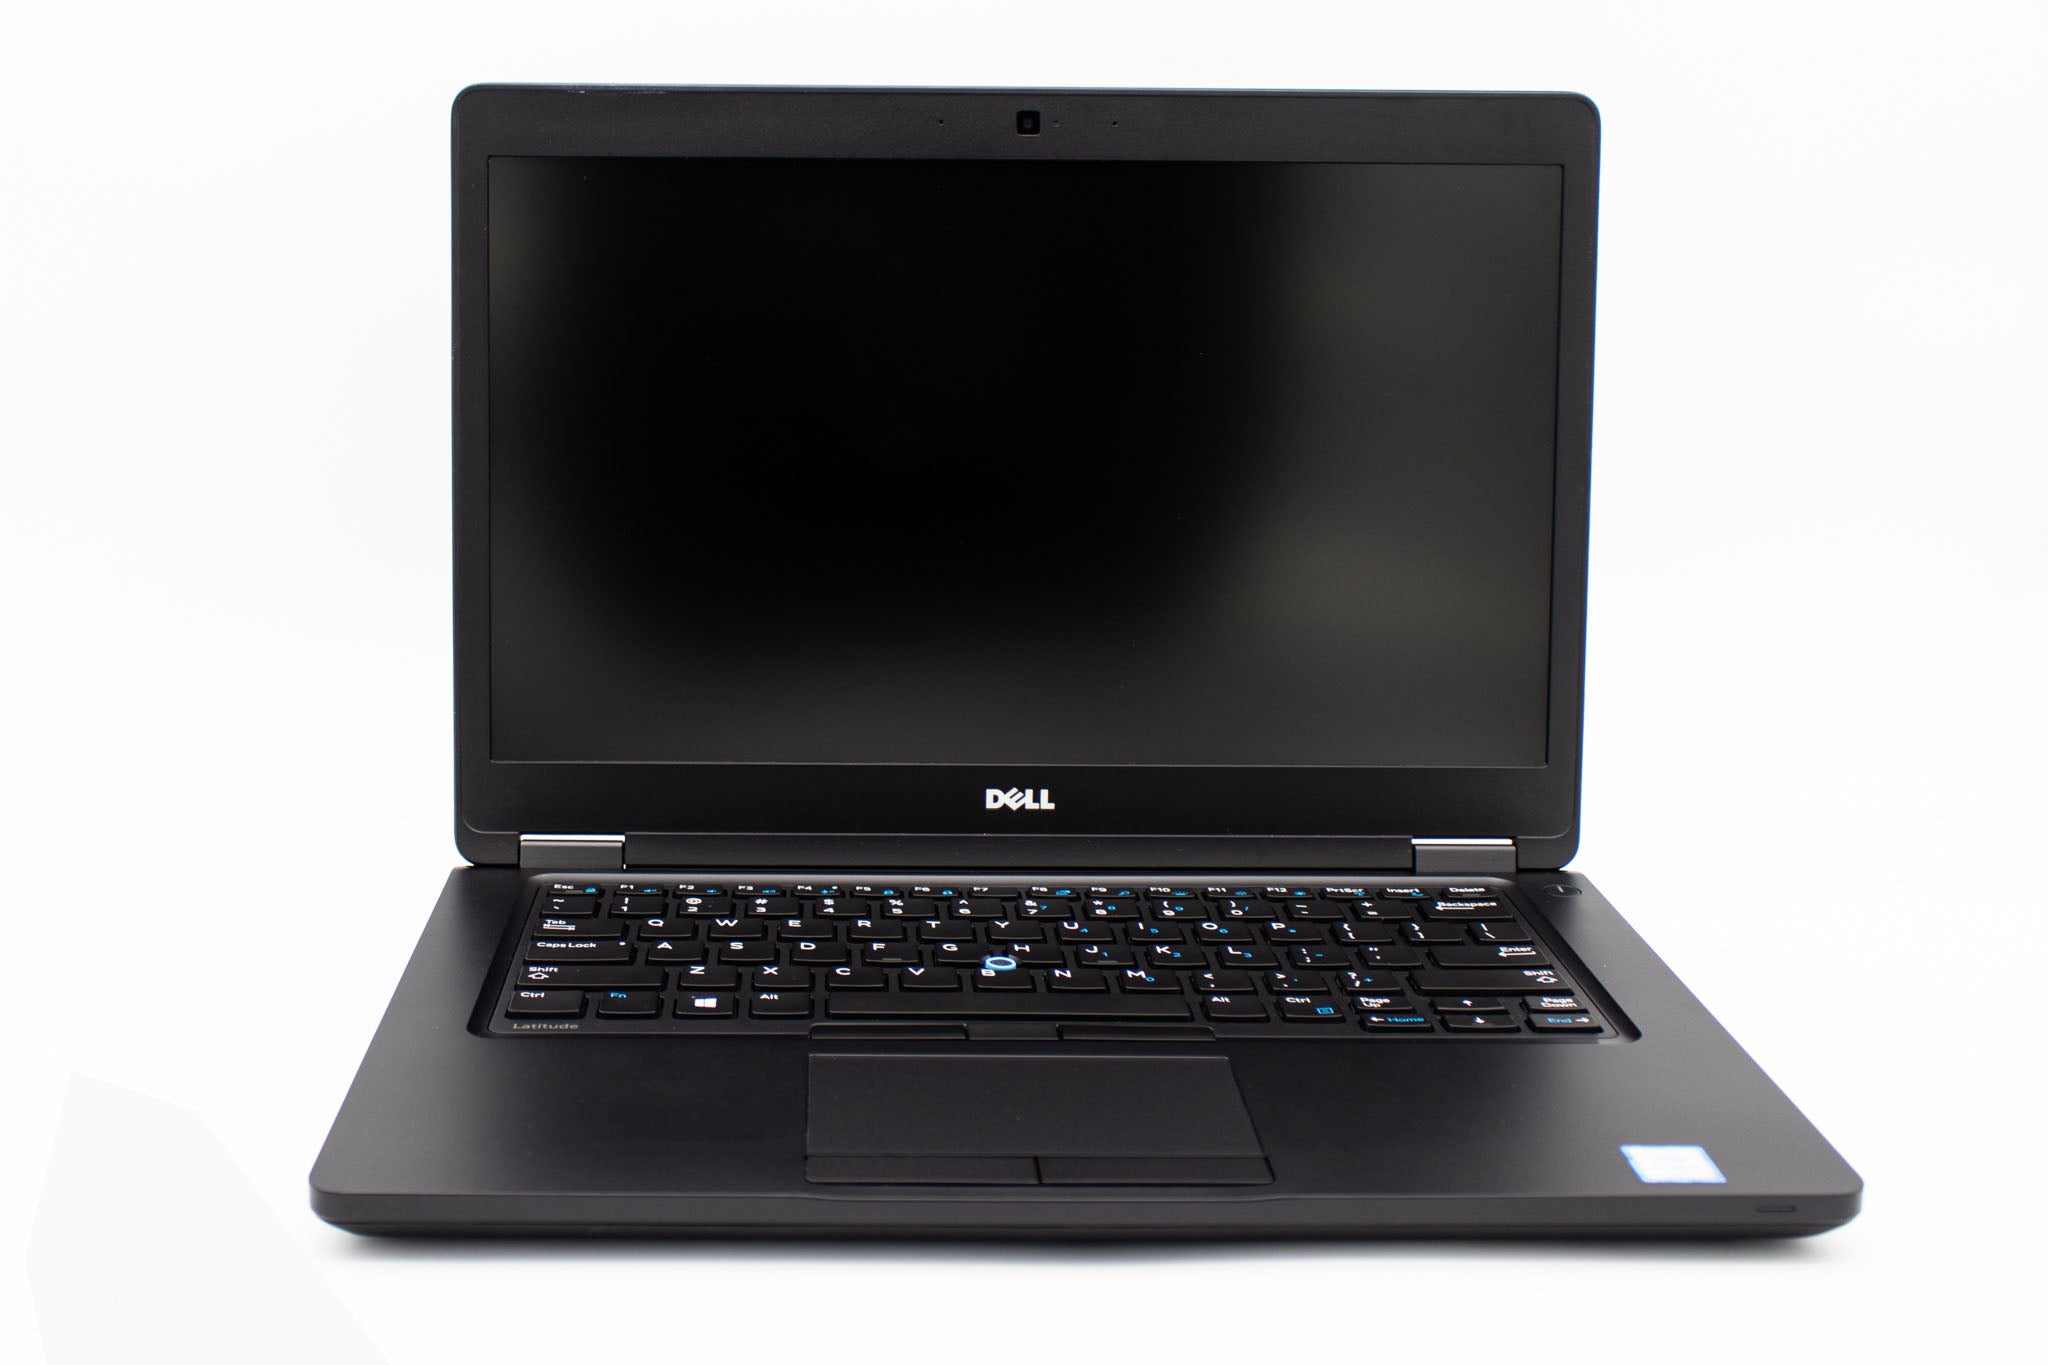 Refurbished Dell Latitude E5480 Laptop Computer, Intel Core i5, 256GB Solid State Hard Drive, 16GB Ram, Windows 11 Operating System One Year Warranty